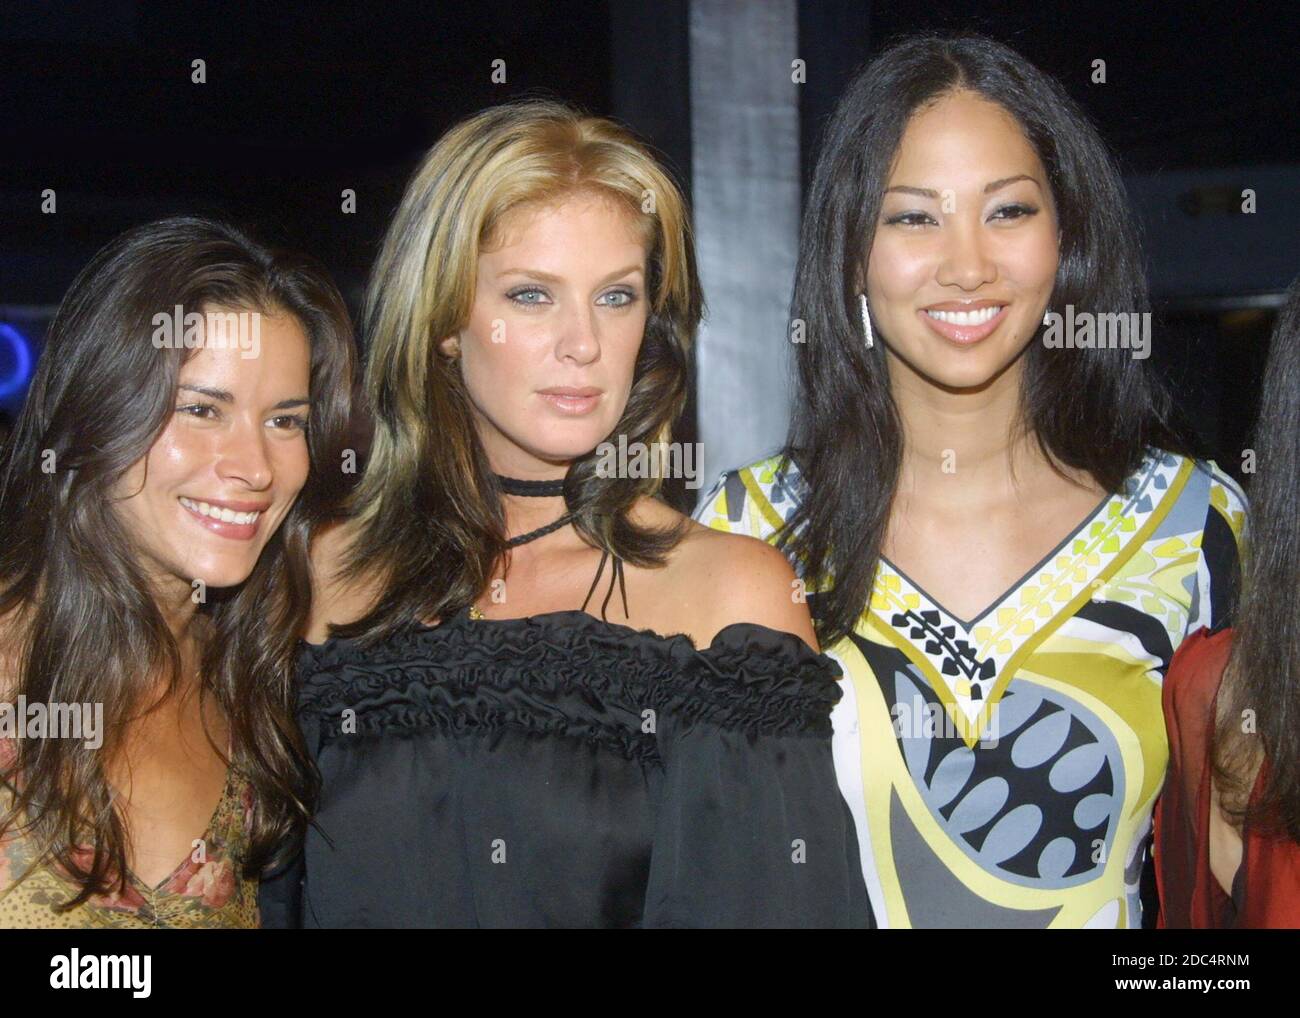 Miami Beach, FL 11-17-2001 Patricia Velasquez, Rachel Hunter and Kimora Lee (Mrs. Russell Simmons) at the Ford Models Super Model  of the  World event at Level. Photo by Adam Scull/PHOTOlink Stock Photo